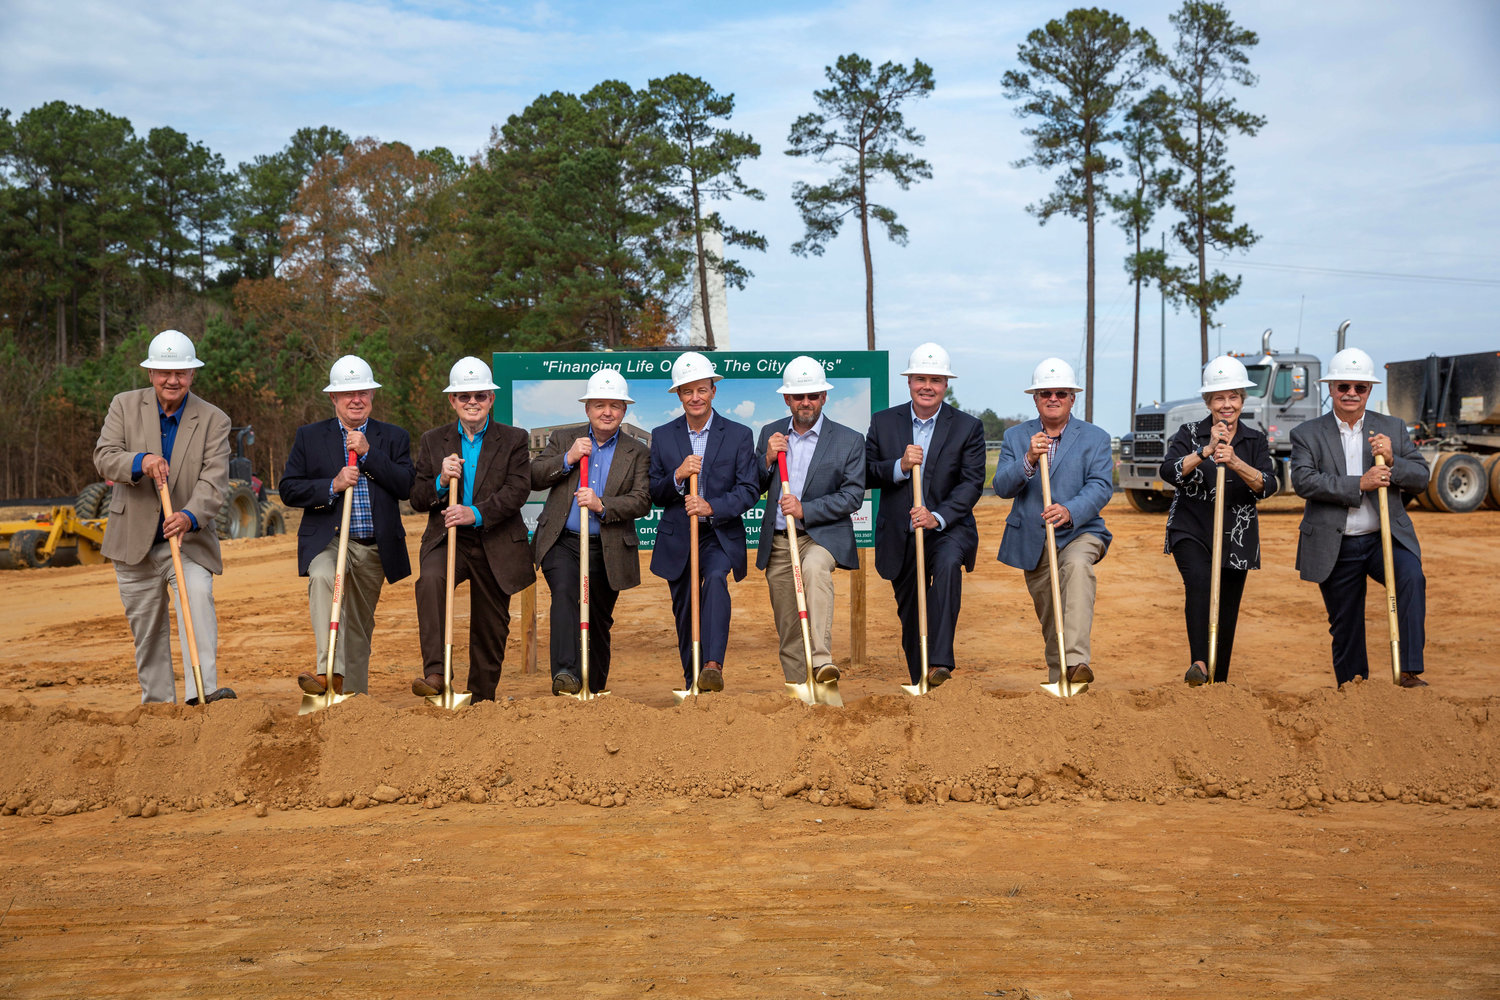 Southern AgCredit recently broke ground on its new headquarters and branch office building located on the I-55 frontage road in Ridgeland, Mississippi. From left are Southern AgCredit directors Larry Killebrew, Gene Boykin, Van Bennett, Steve Dockens and Allen Eubanks; Board Vice Chairman Scott Bell; CEO Phillip Morgan; directors Reggie Allen and Linda Staniszewski; and Board Chairman Kevin Rhodes.